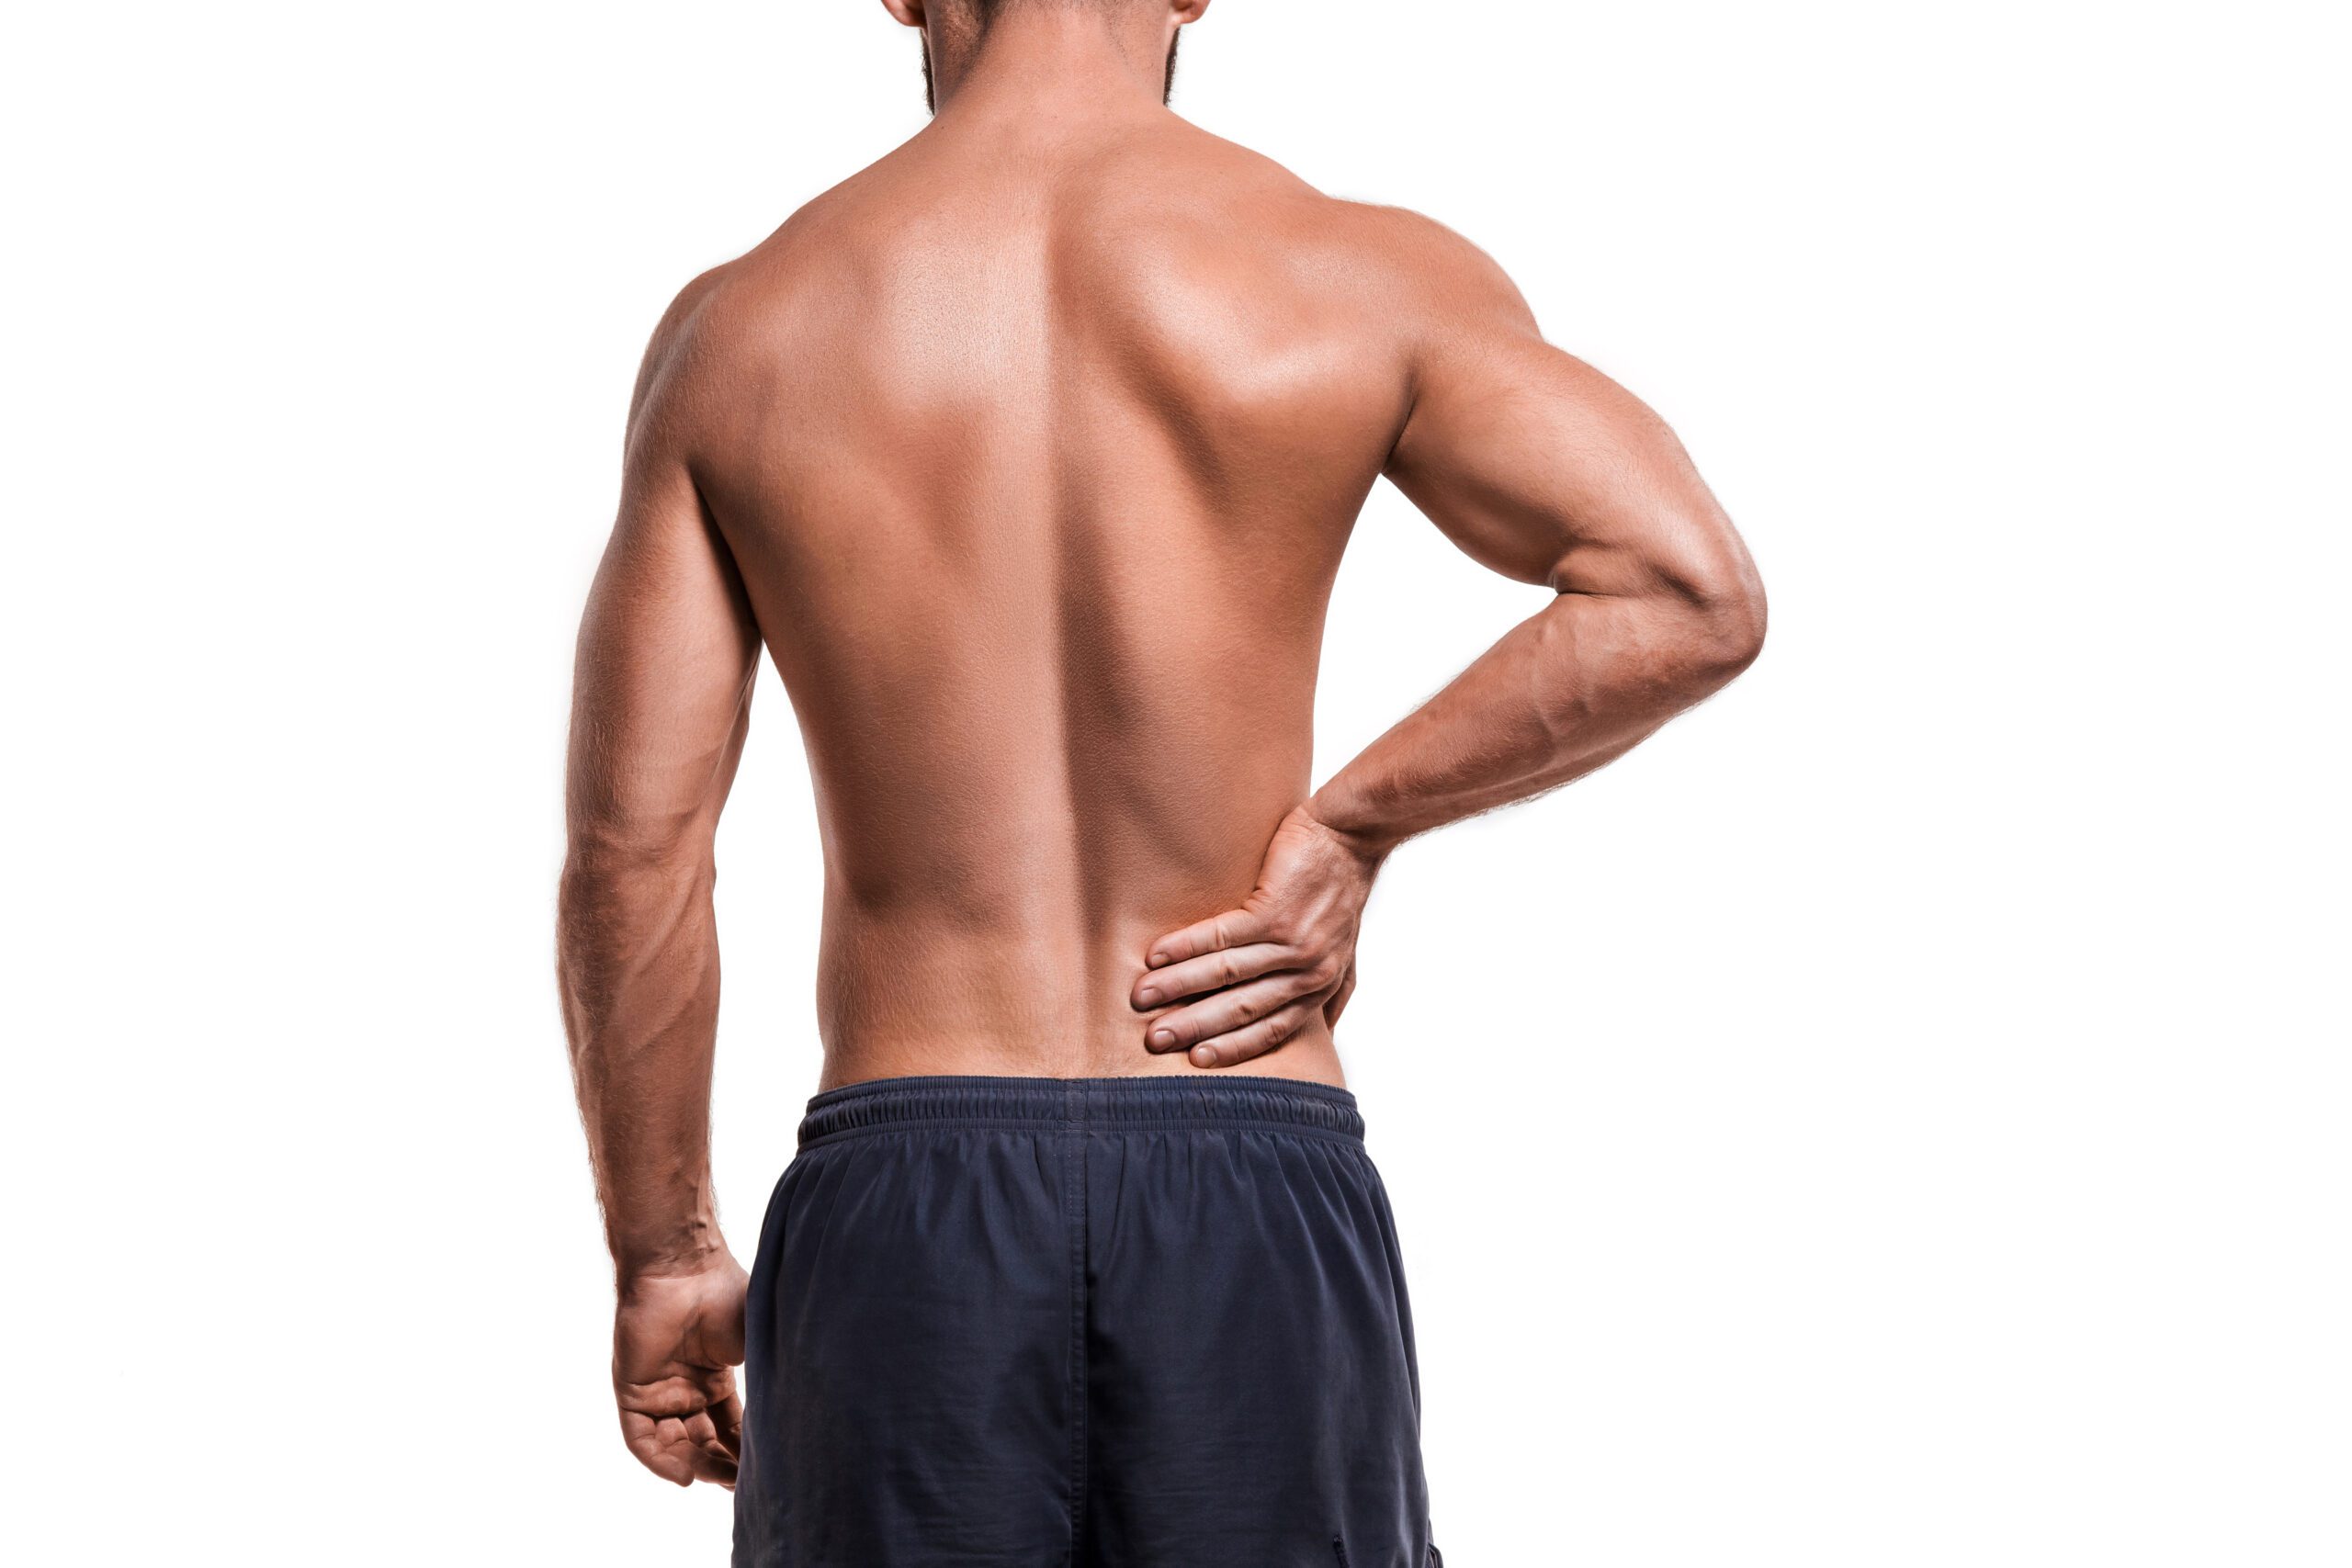 Acupuncture can help with chronic back pain